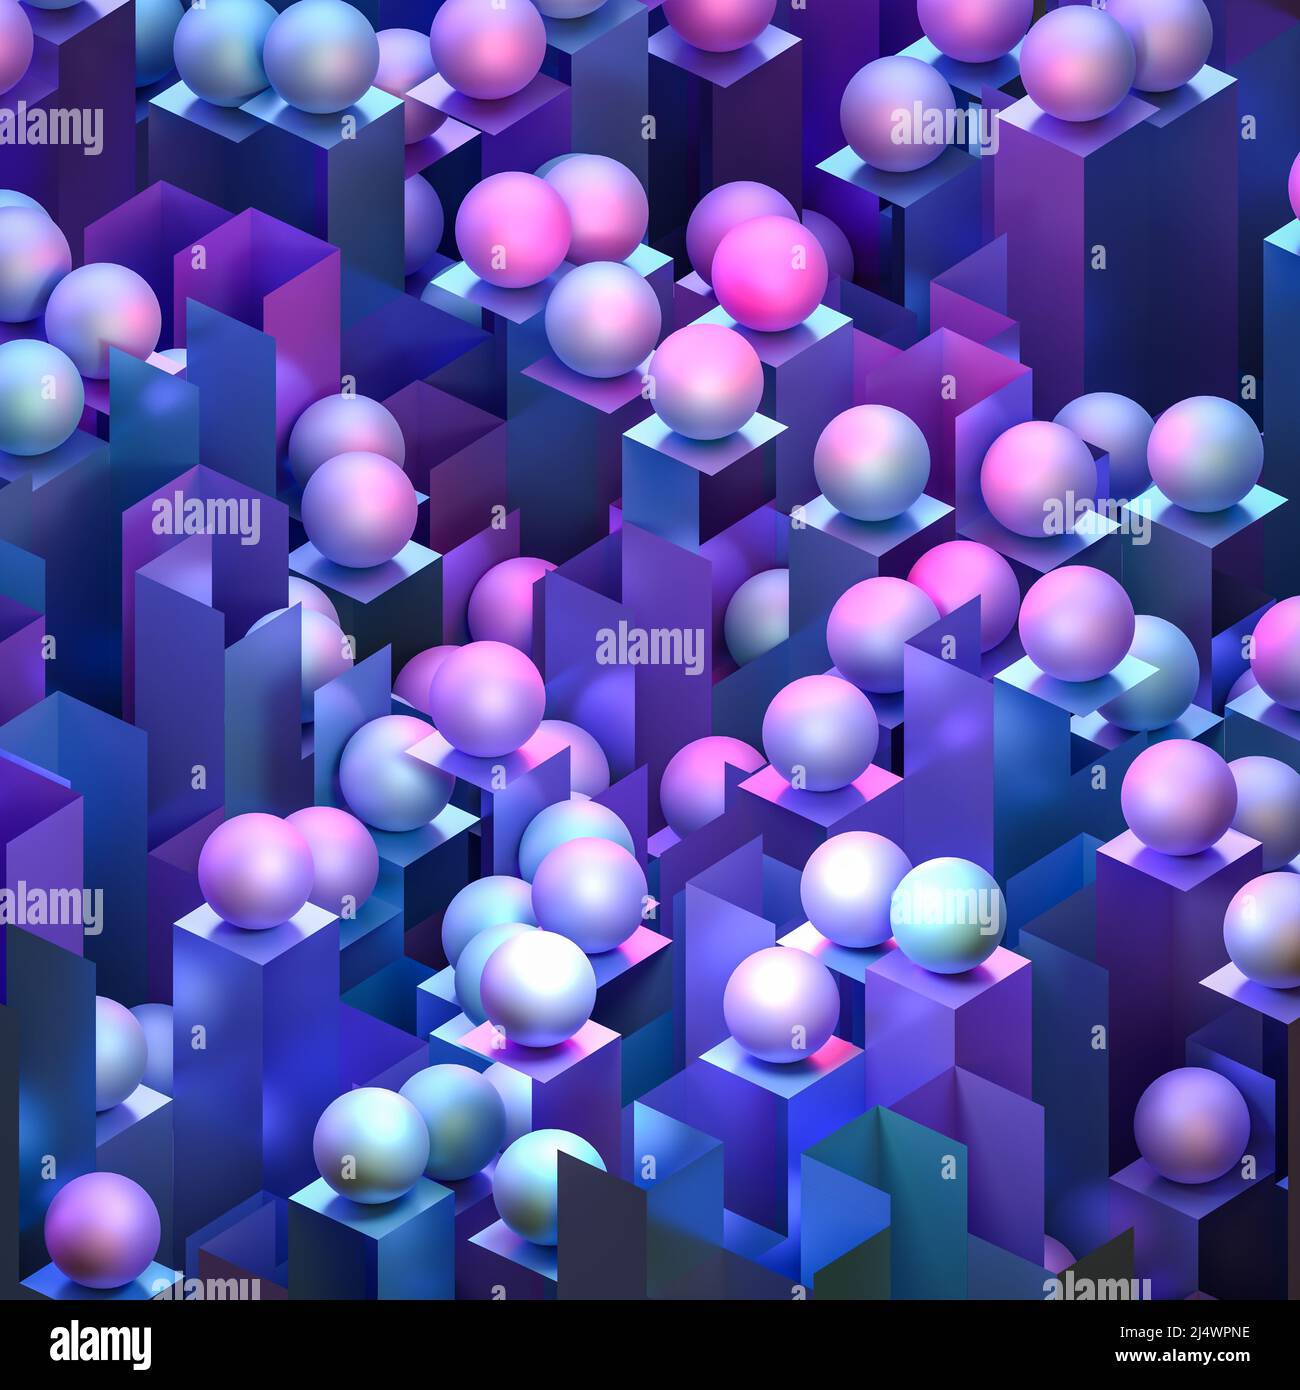 Abstract background of blue isometric cuboids with spheres on top. Stock Photo